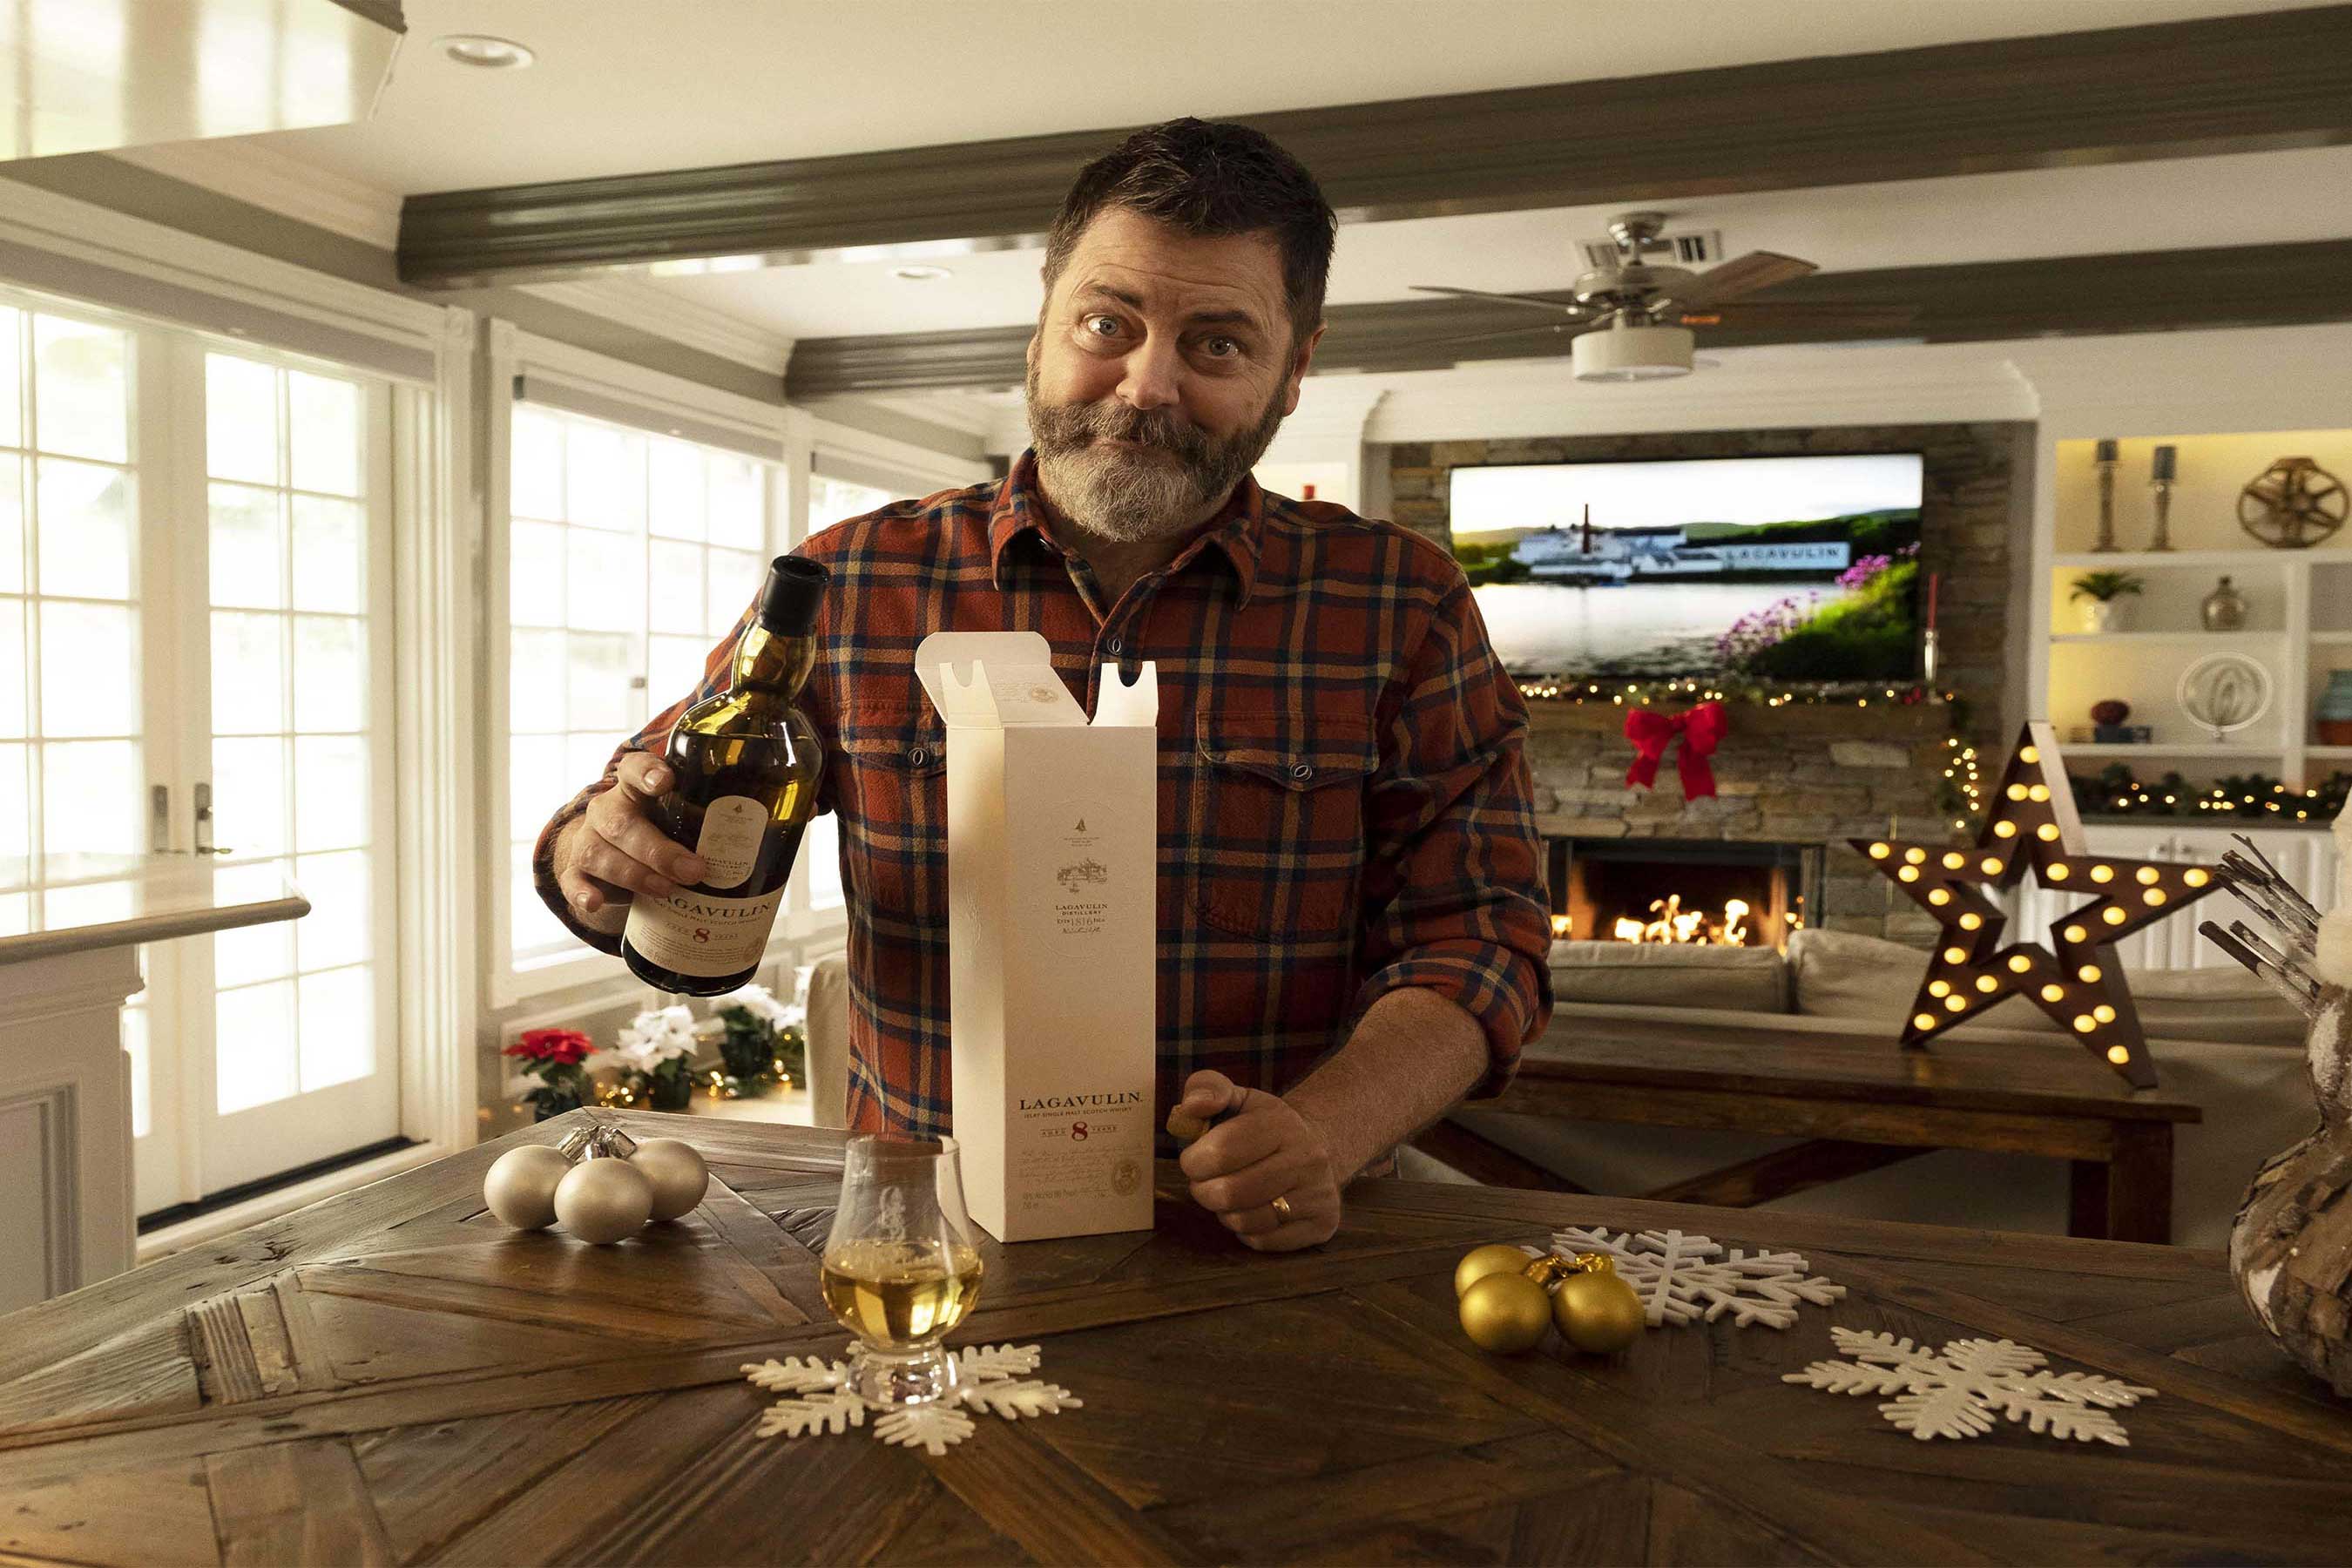 Actor Nick Offerman pouring a glass of Lagavulin Single Malt